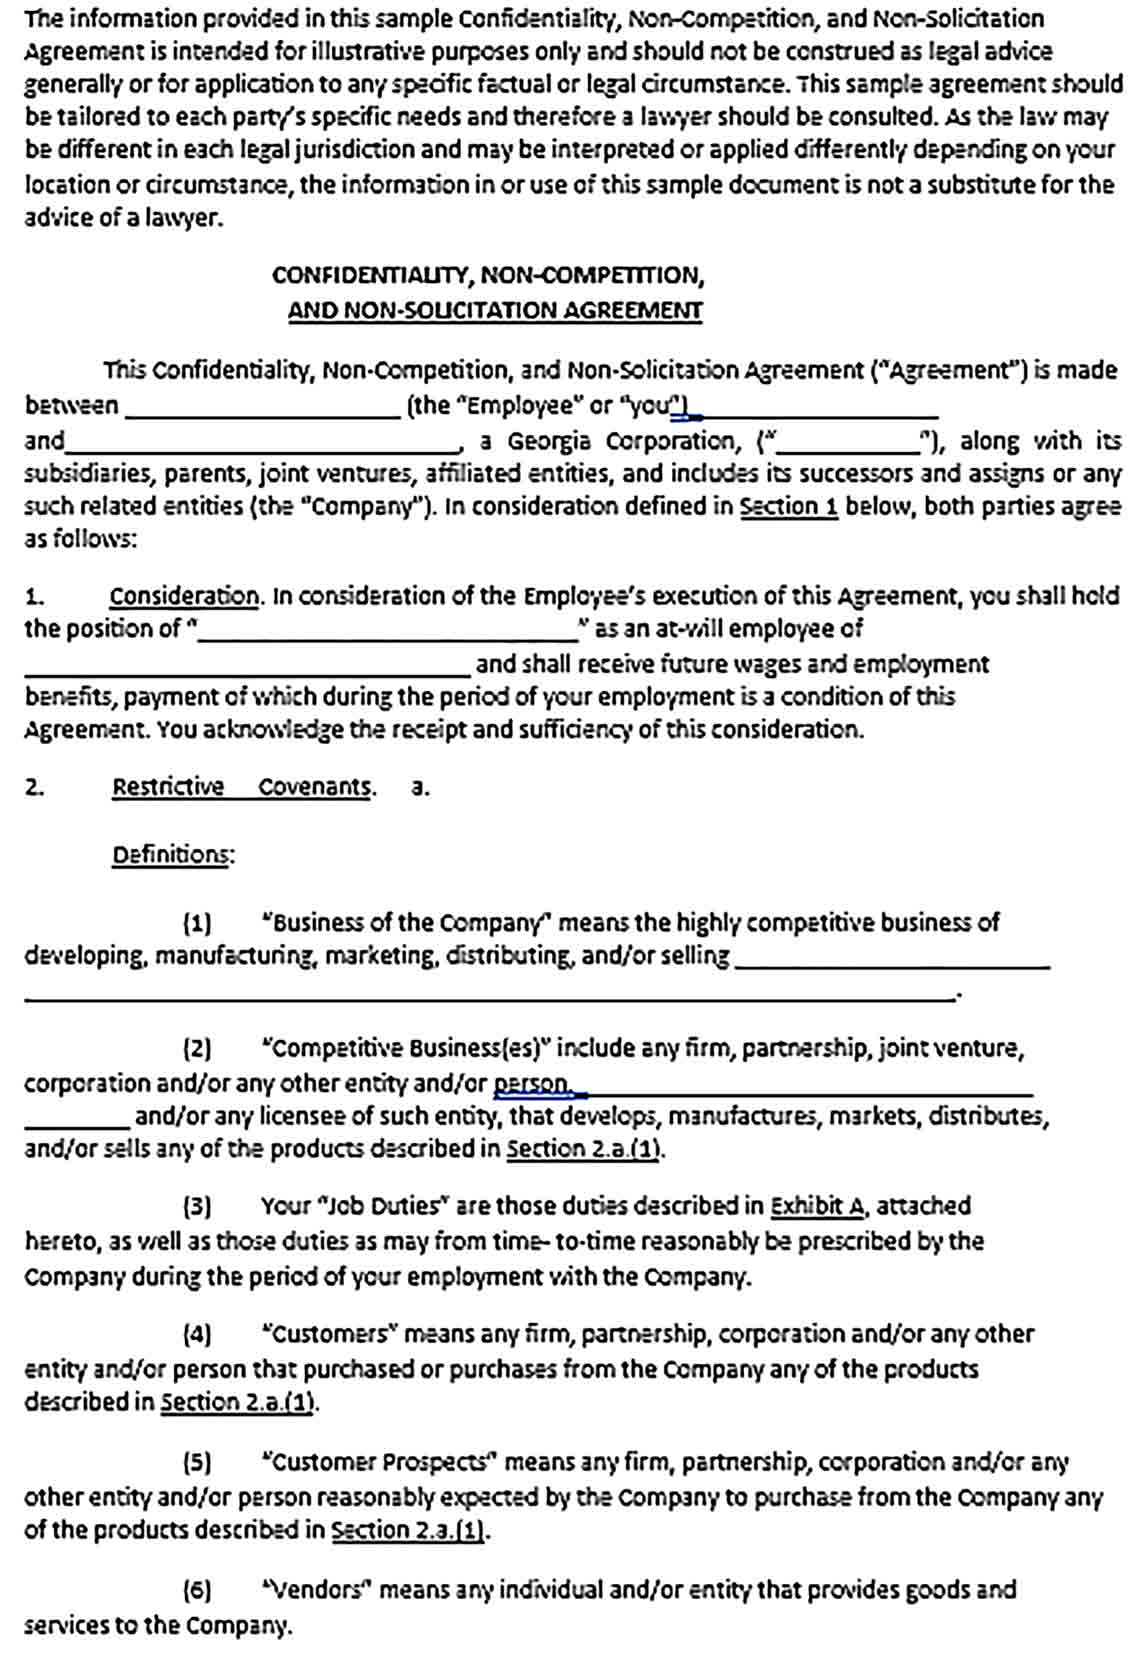 Sample Employee Confidentiality Agreement Form